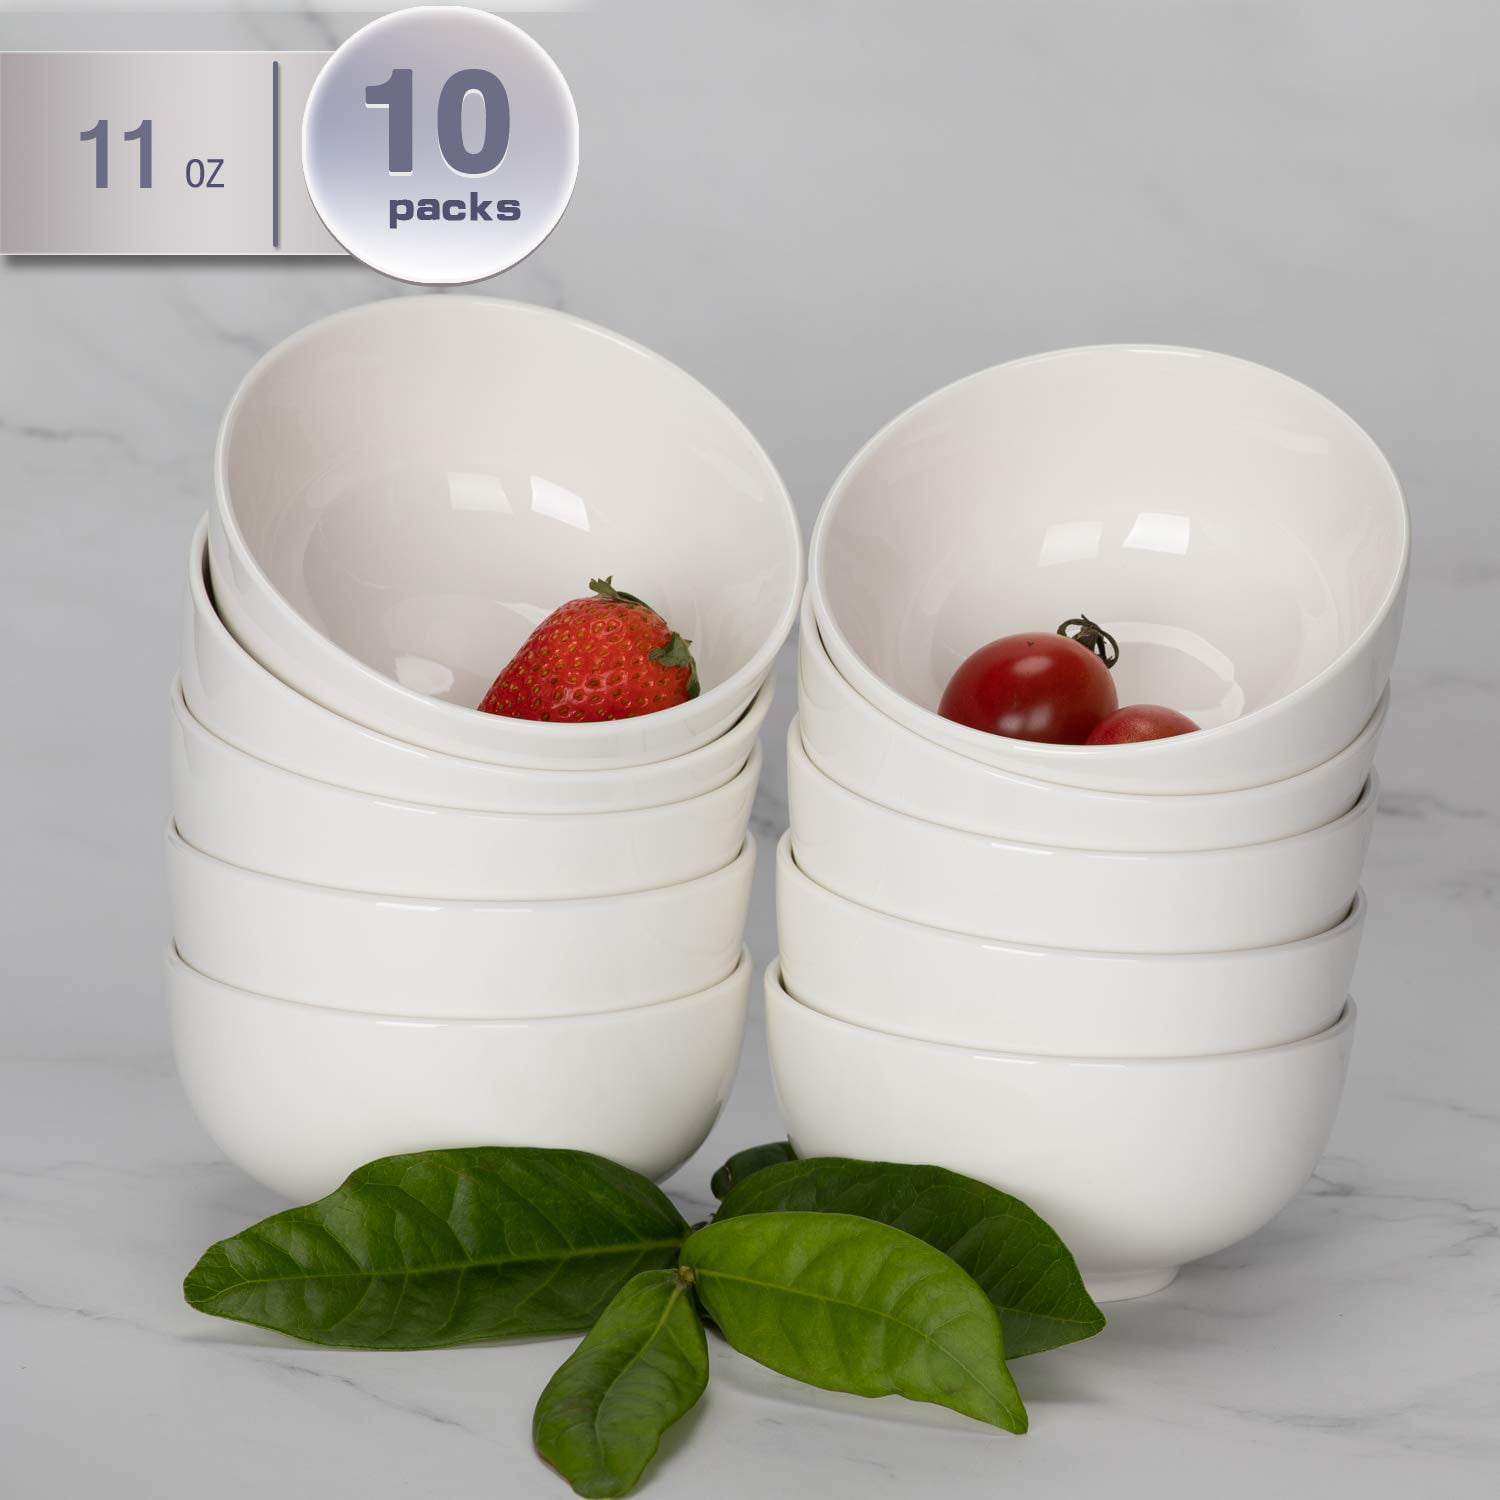 Ice Cream Set of 10 Soup and Fruit amHomel 4.5 inch Embossed Texture Porcelain Round Bowl Set 12 Ounce for Rice White Cereal 